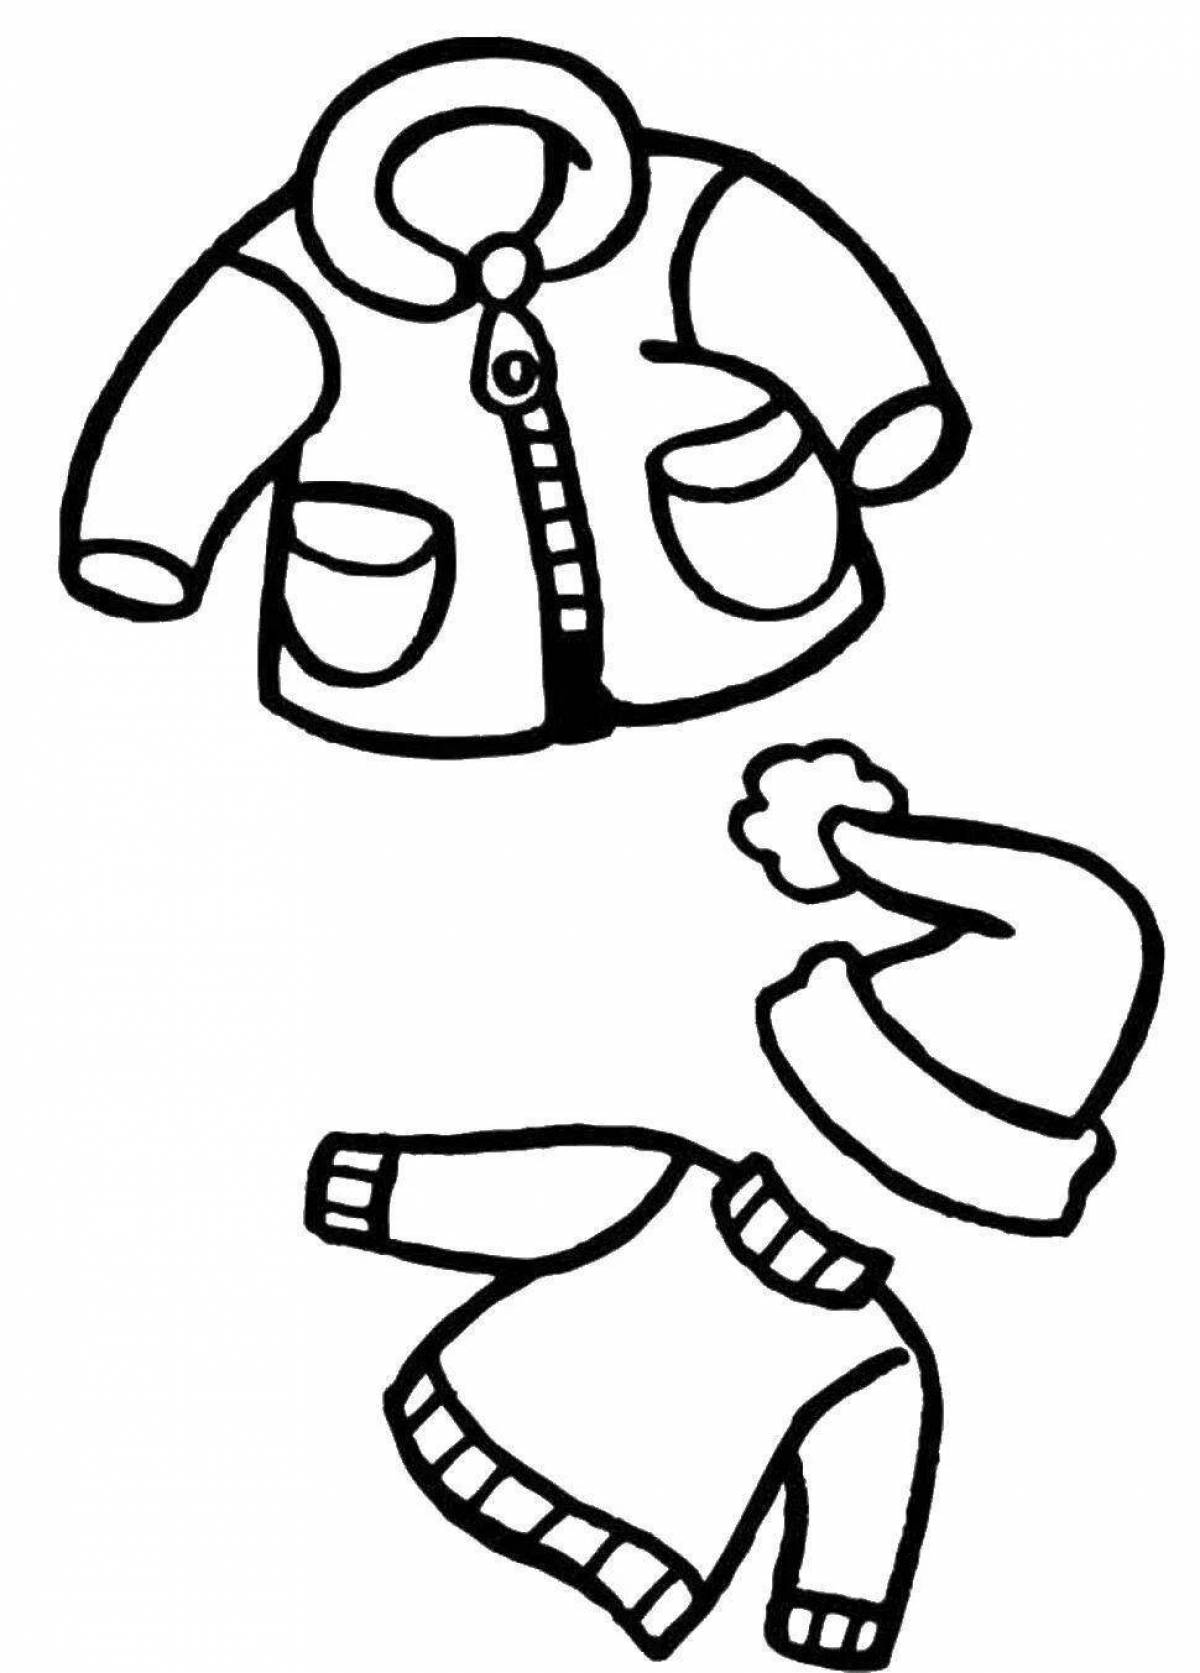 Funky jacket coloring page for children 3-4 years old